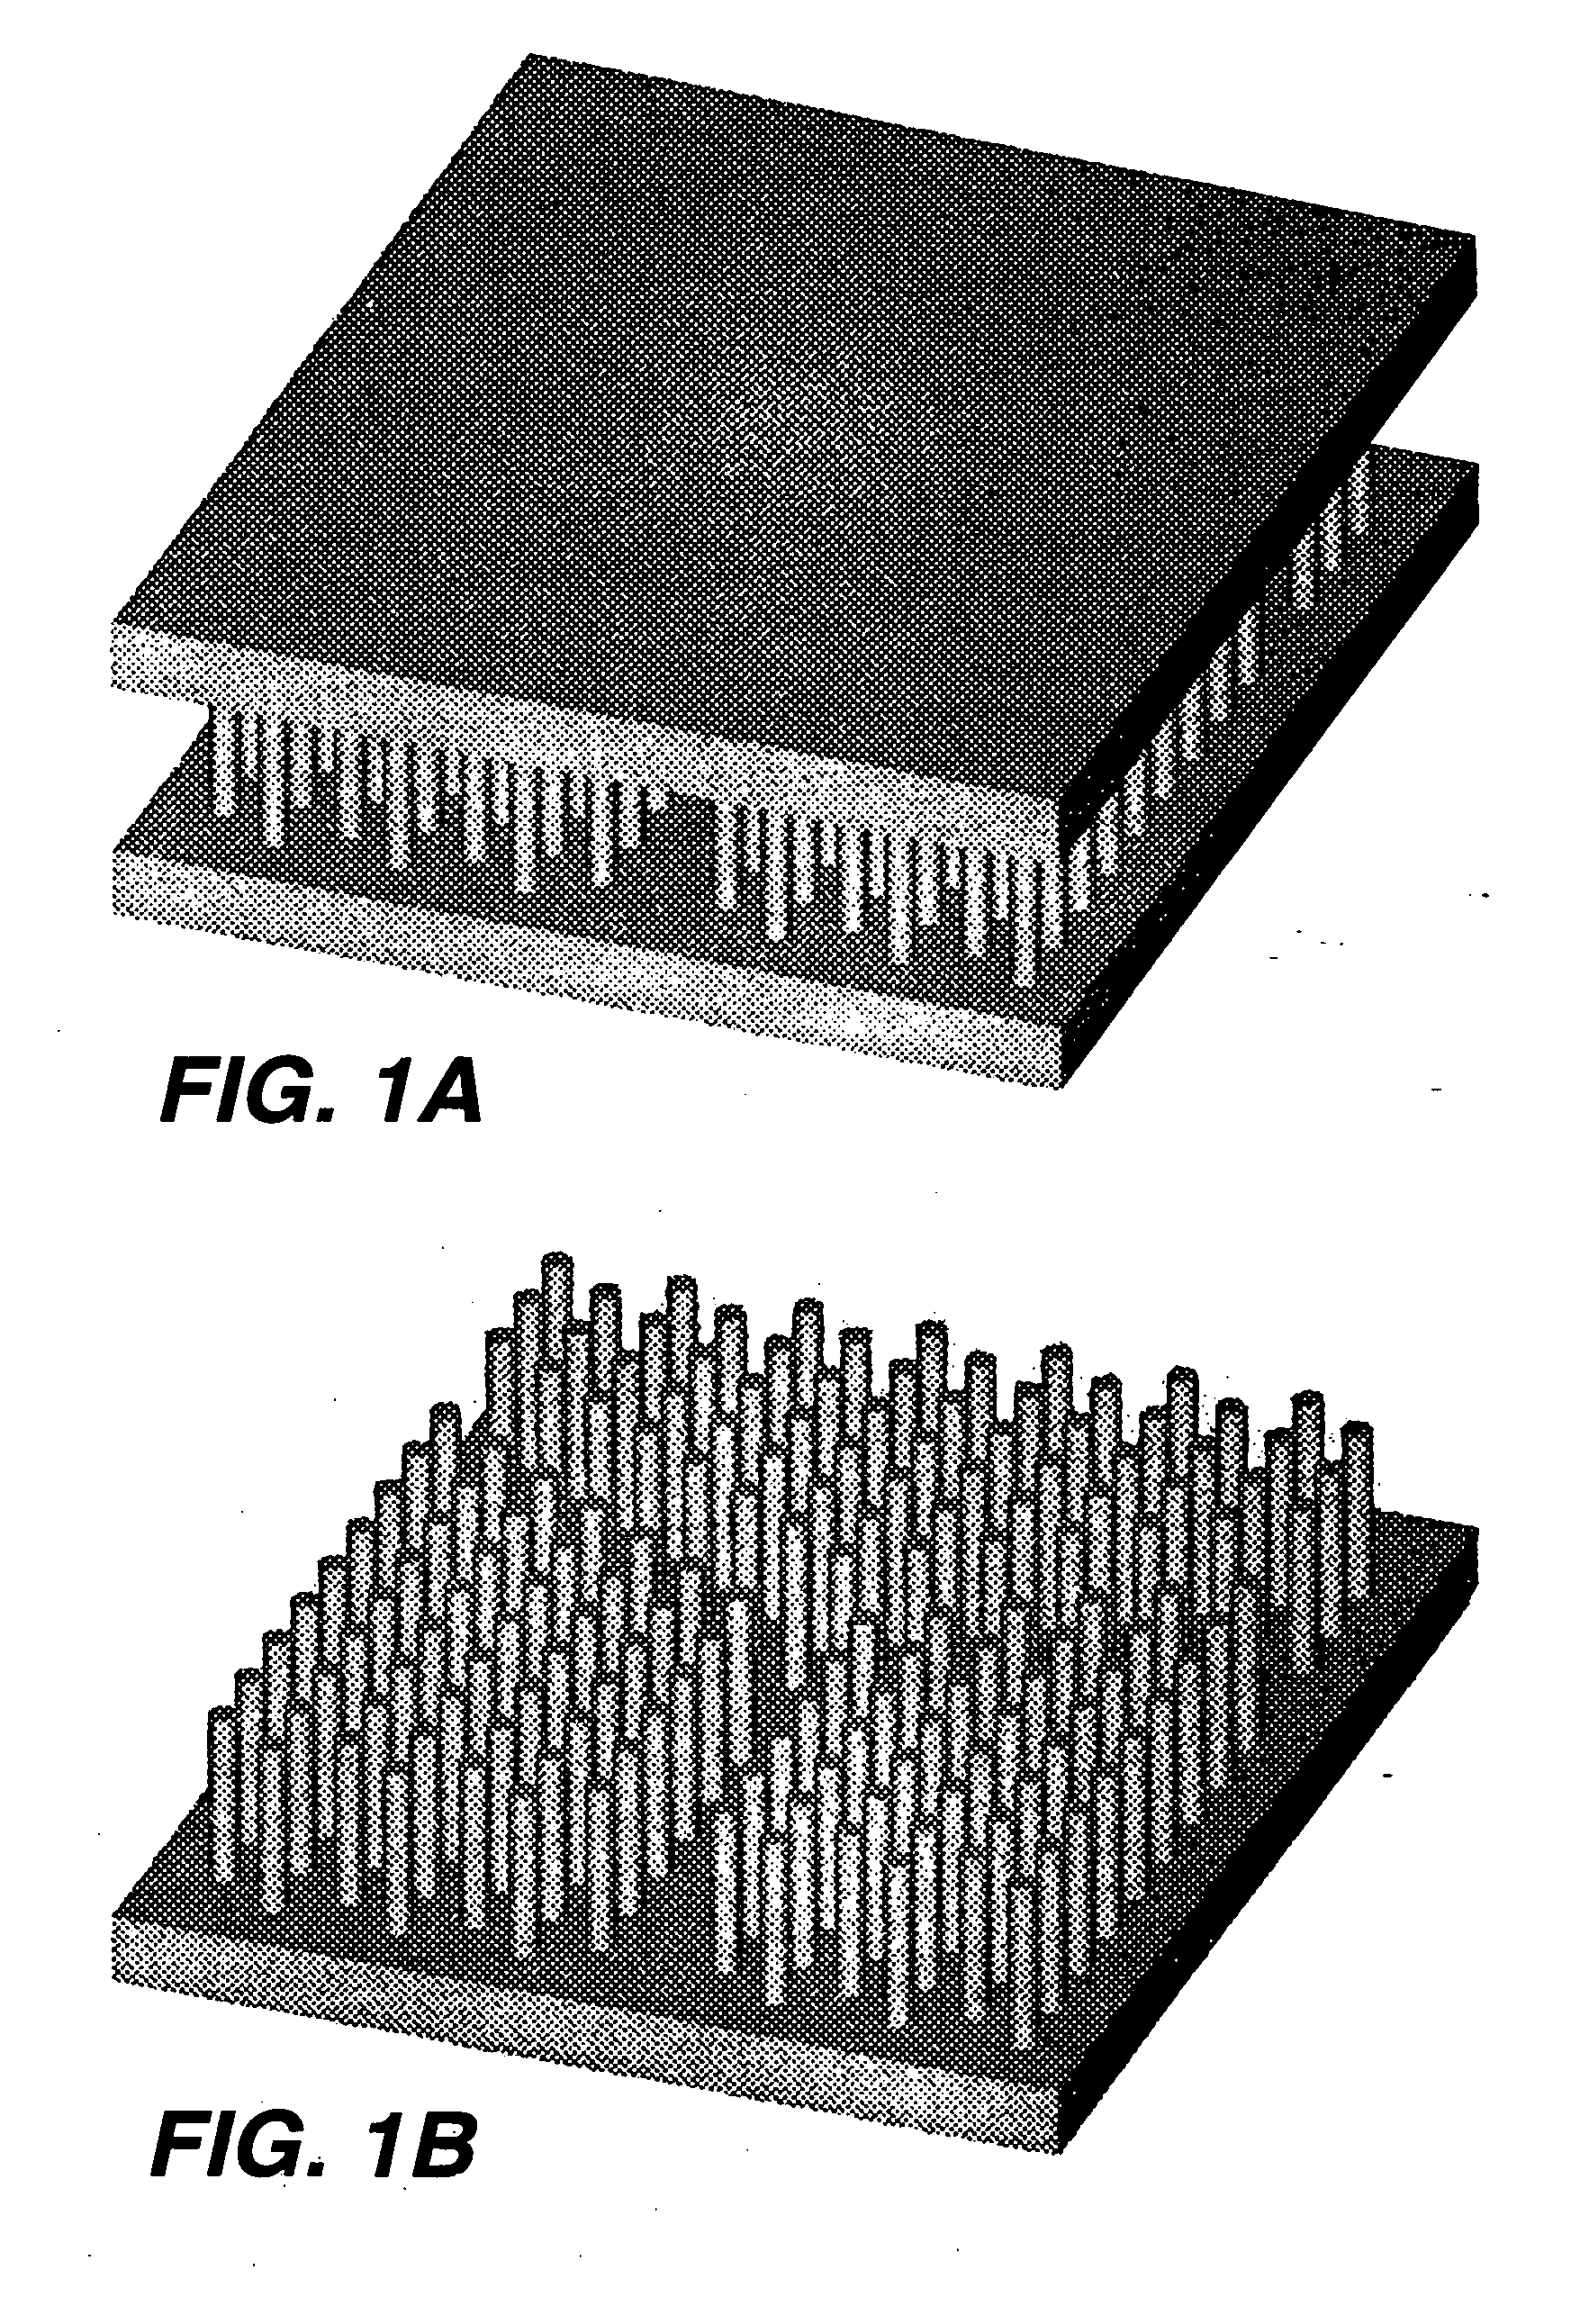 Microstructures and methods of fabricating